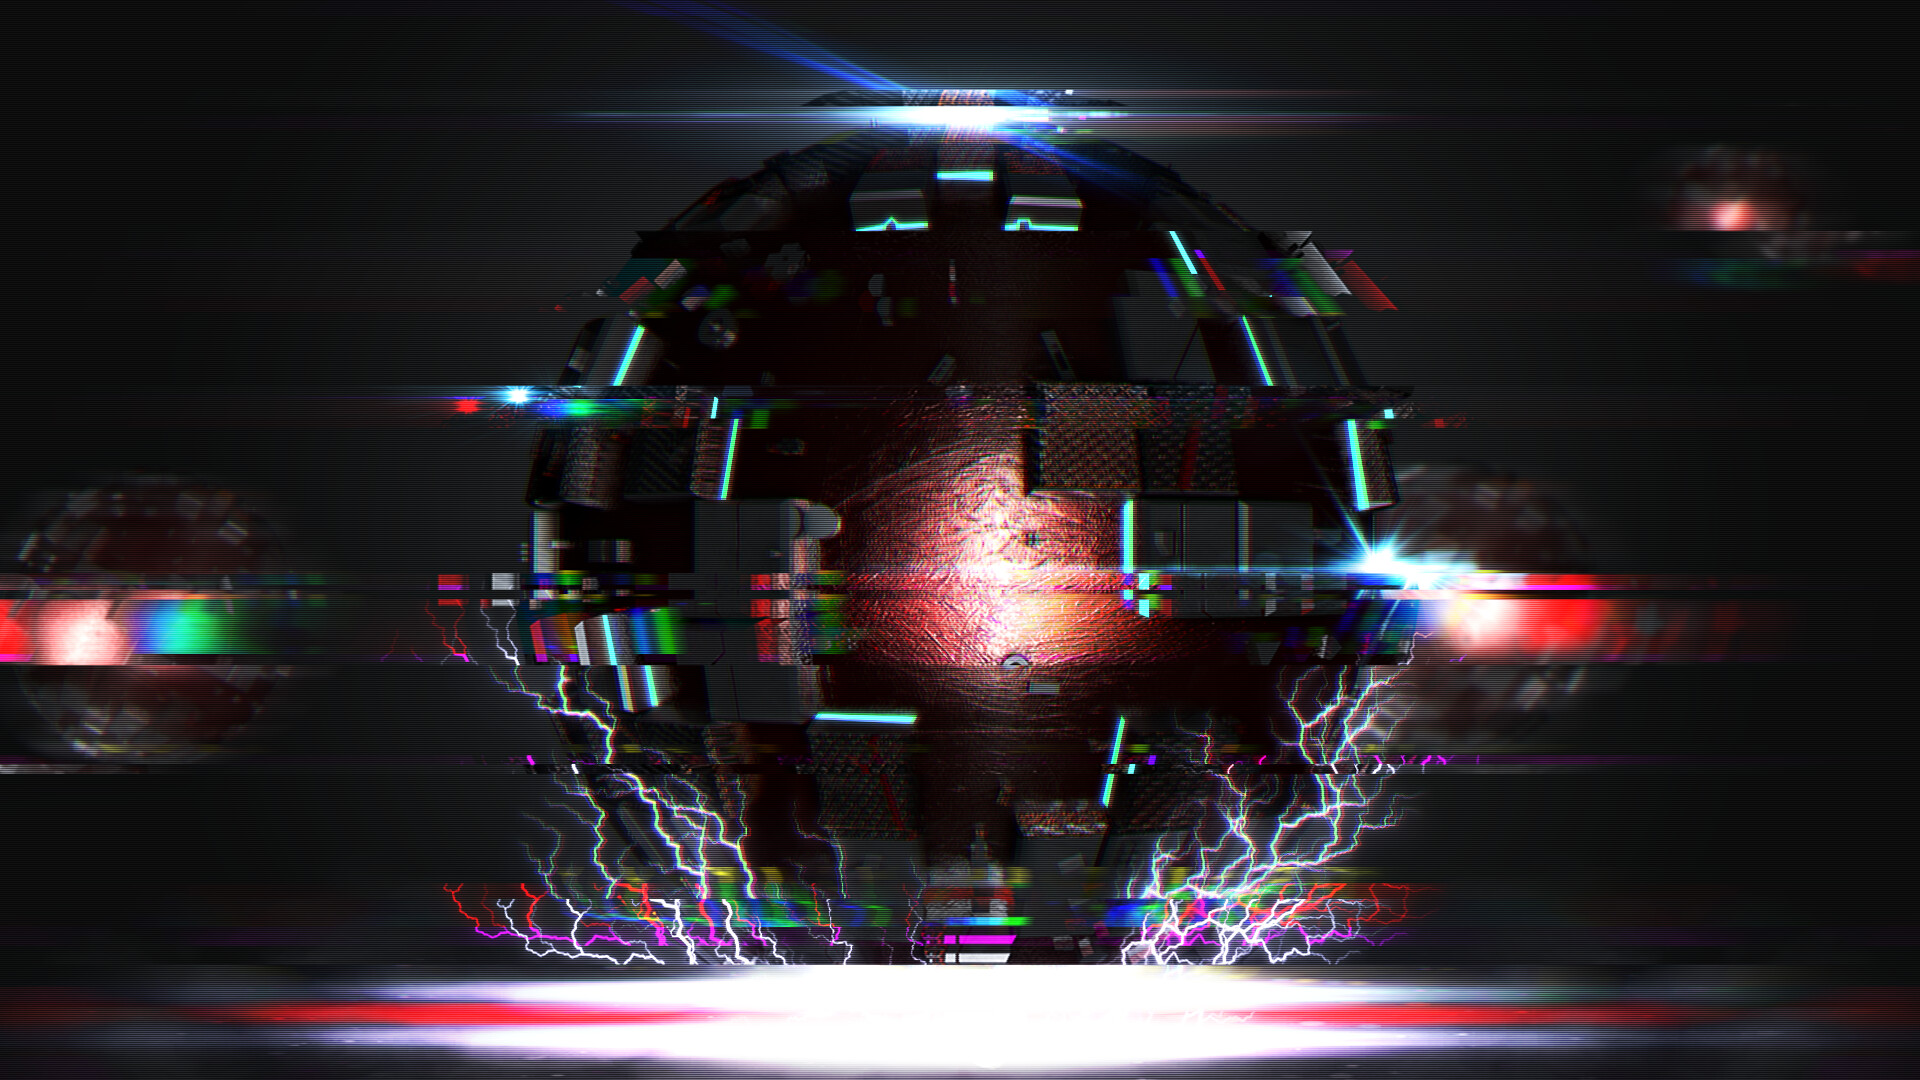 Glitch: Three-dimensional space, Polyhedrons, Electricity, A minor software malfunction. 1920x1080 Full HD Background.